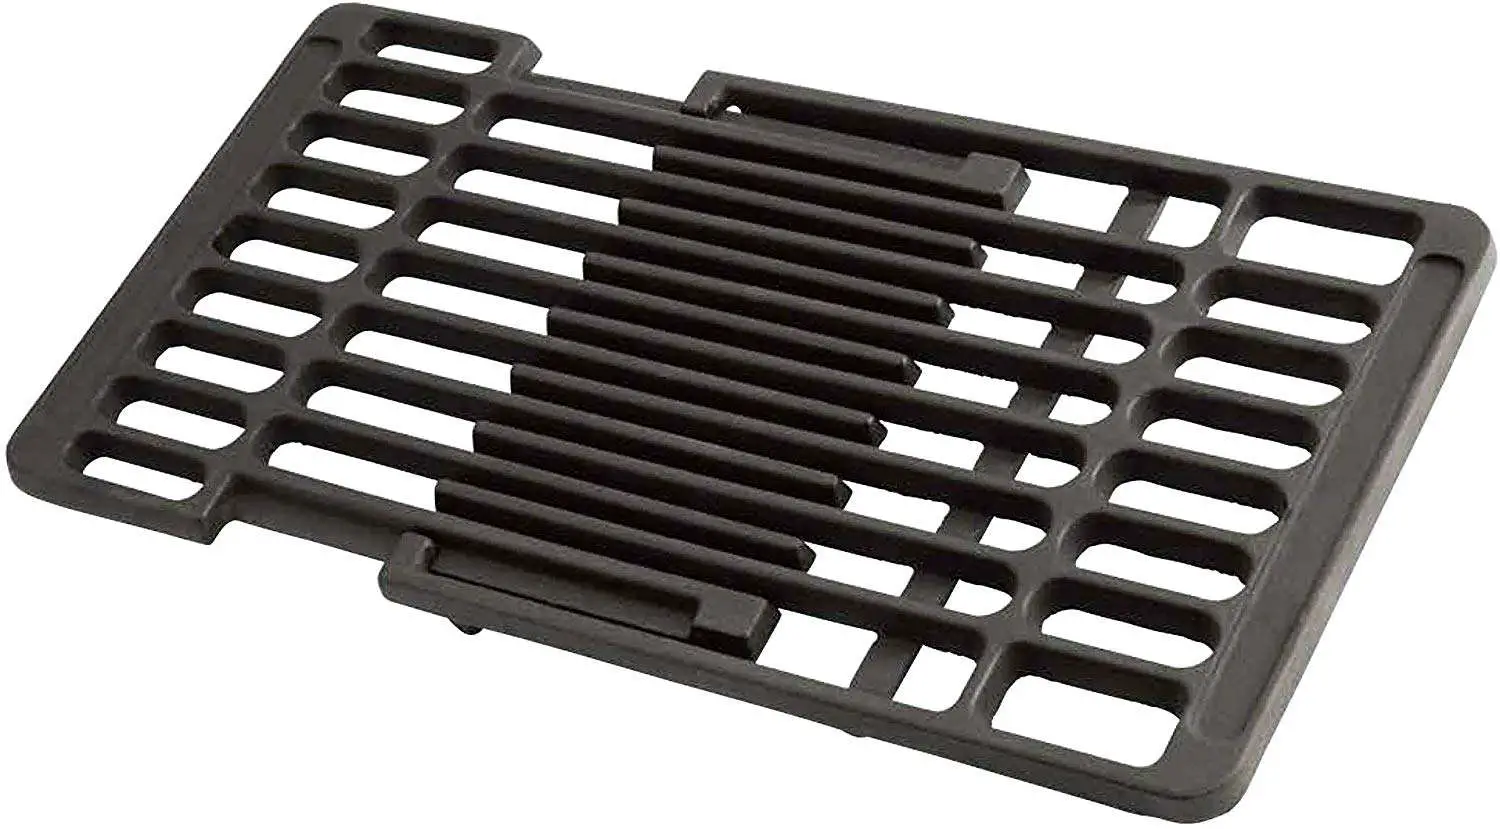 Porcelain Cast Iron Grill Grate, Cooking Grate, Outdoor ...